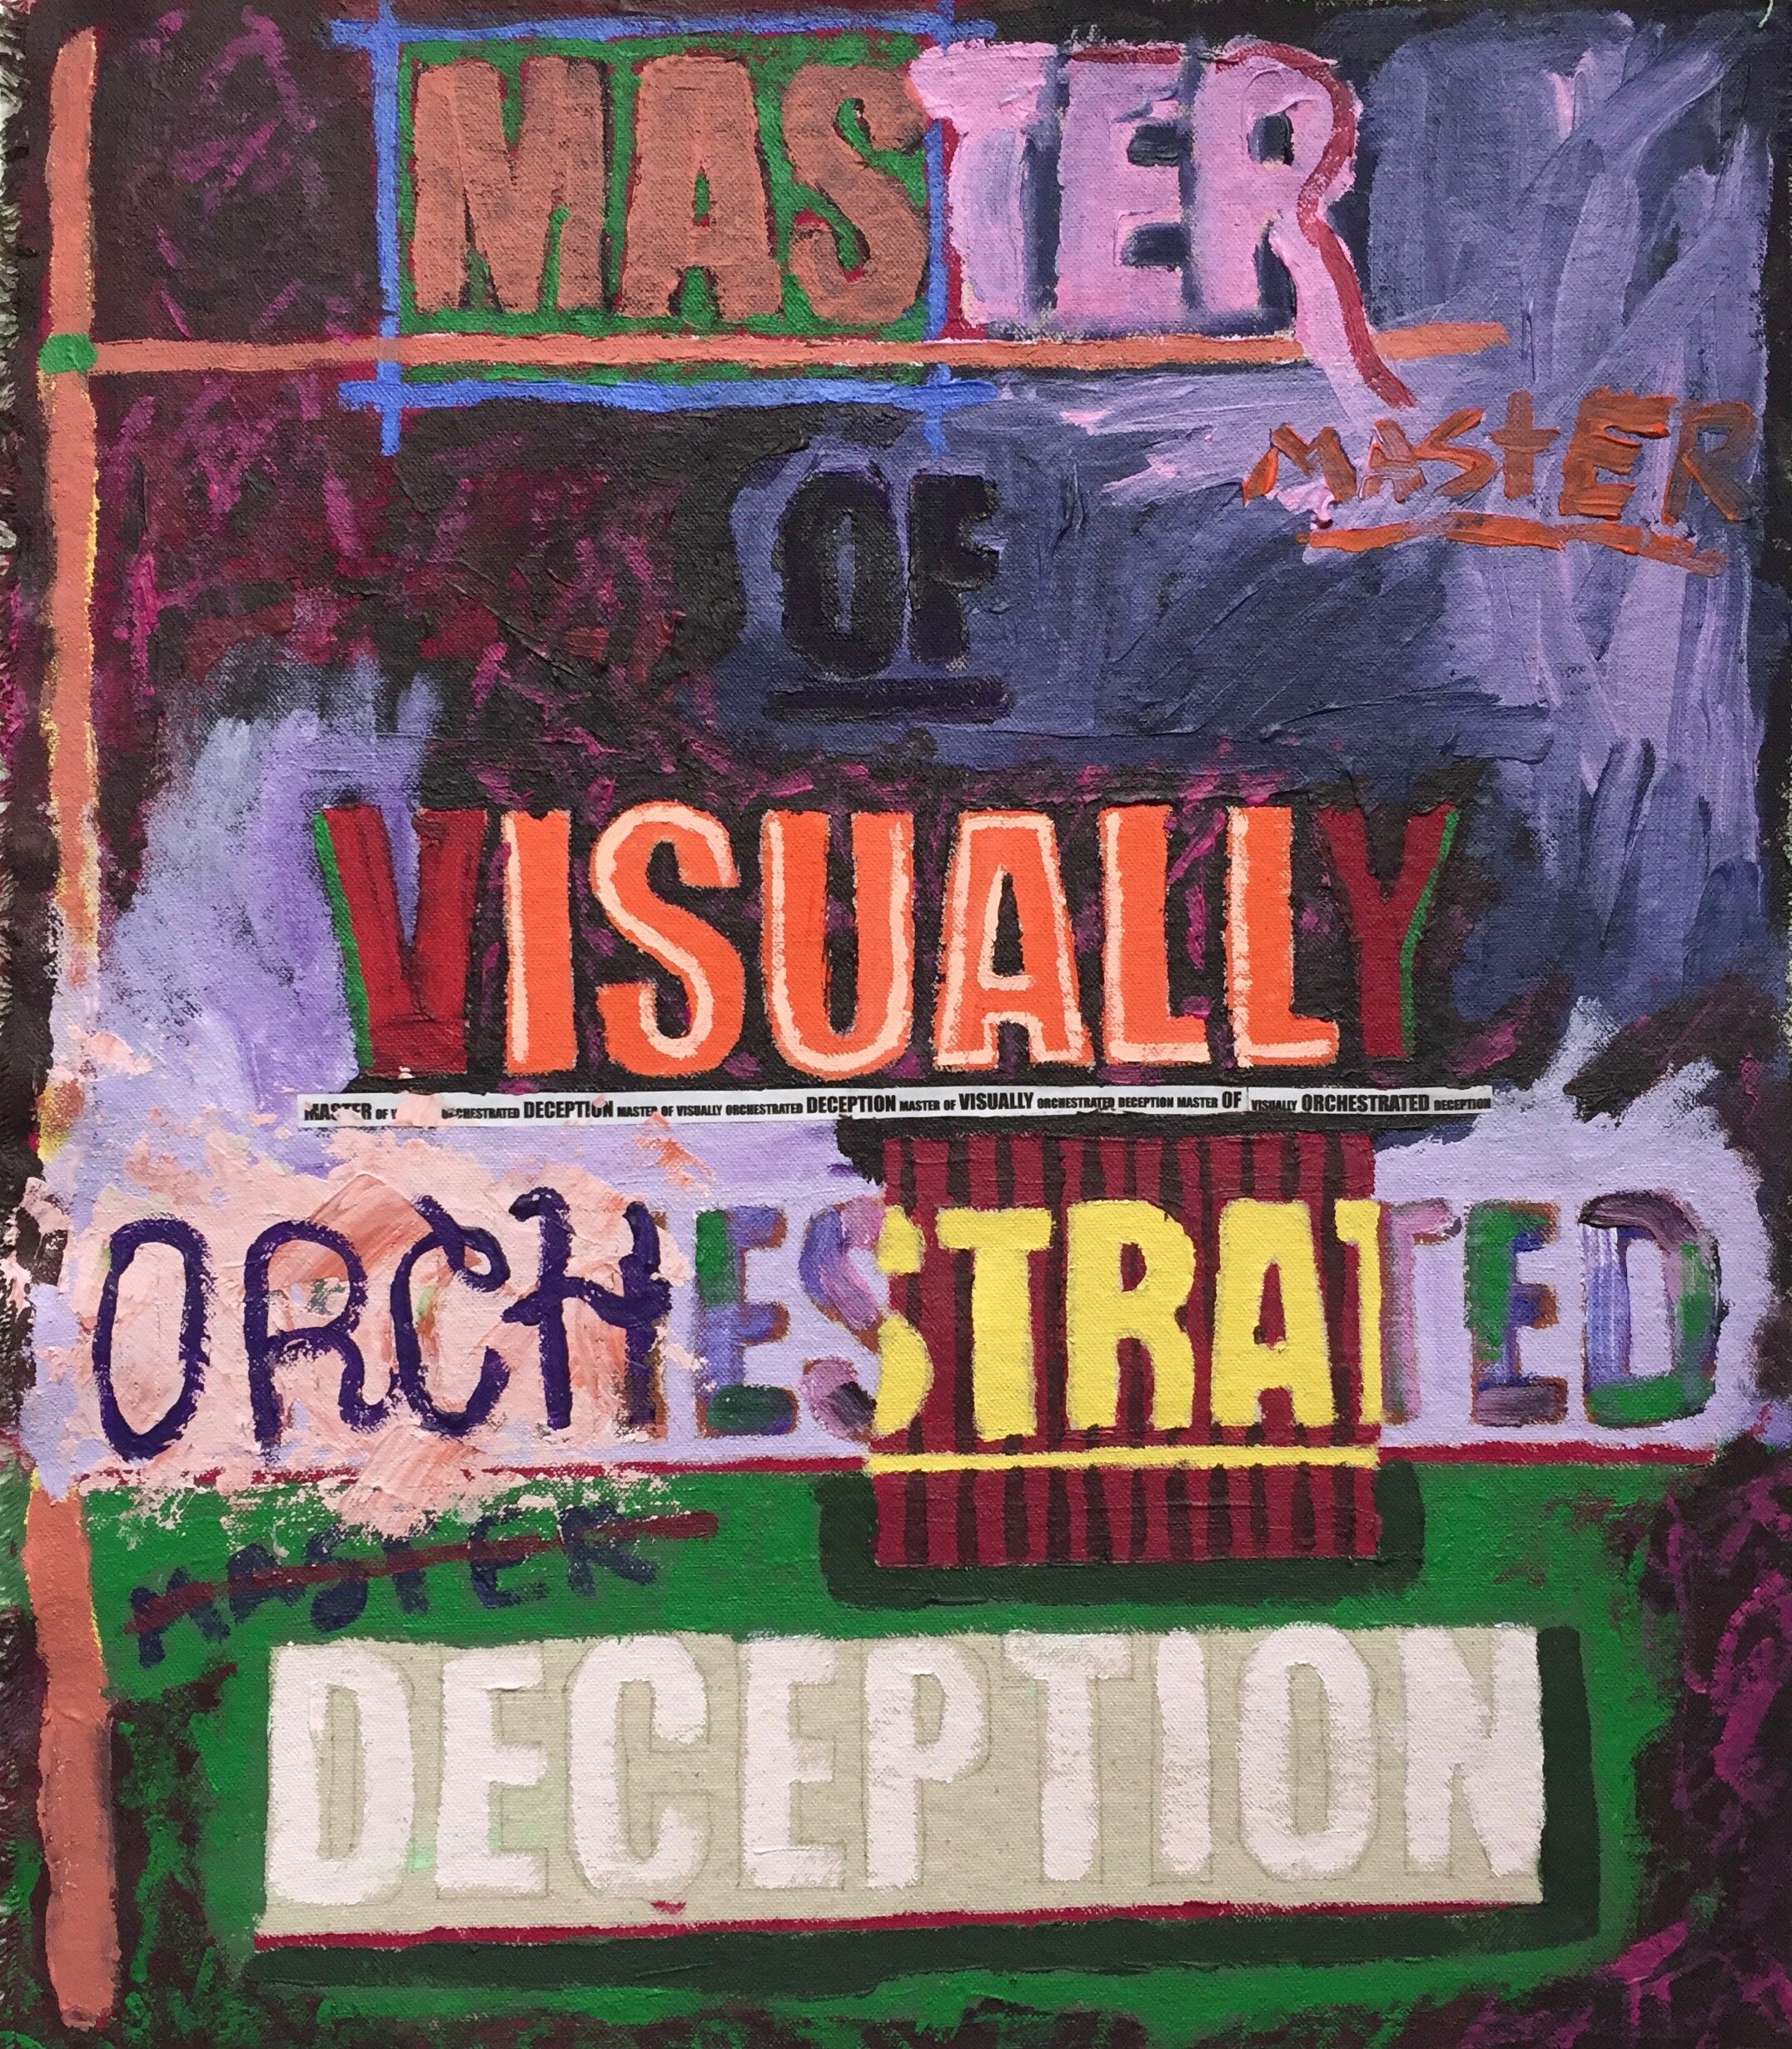 Master of Visually Orchestrated Deception